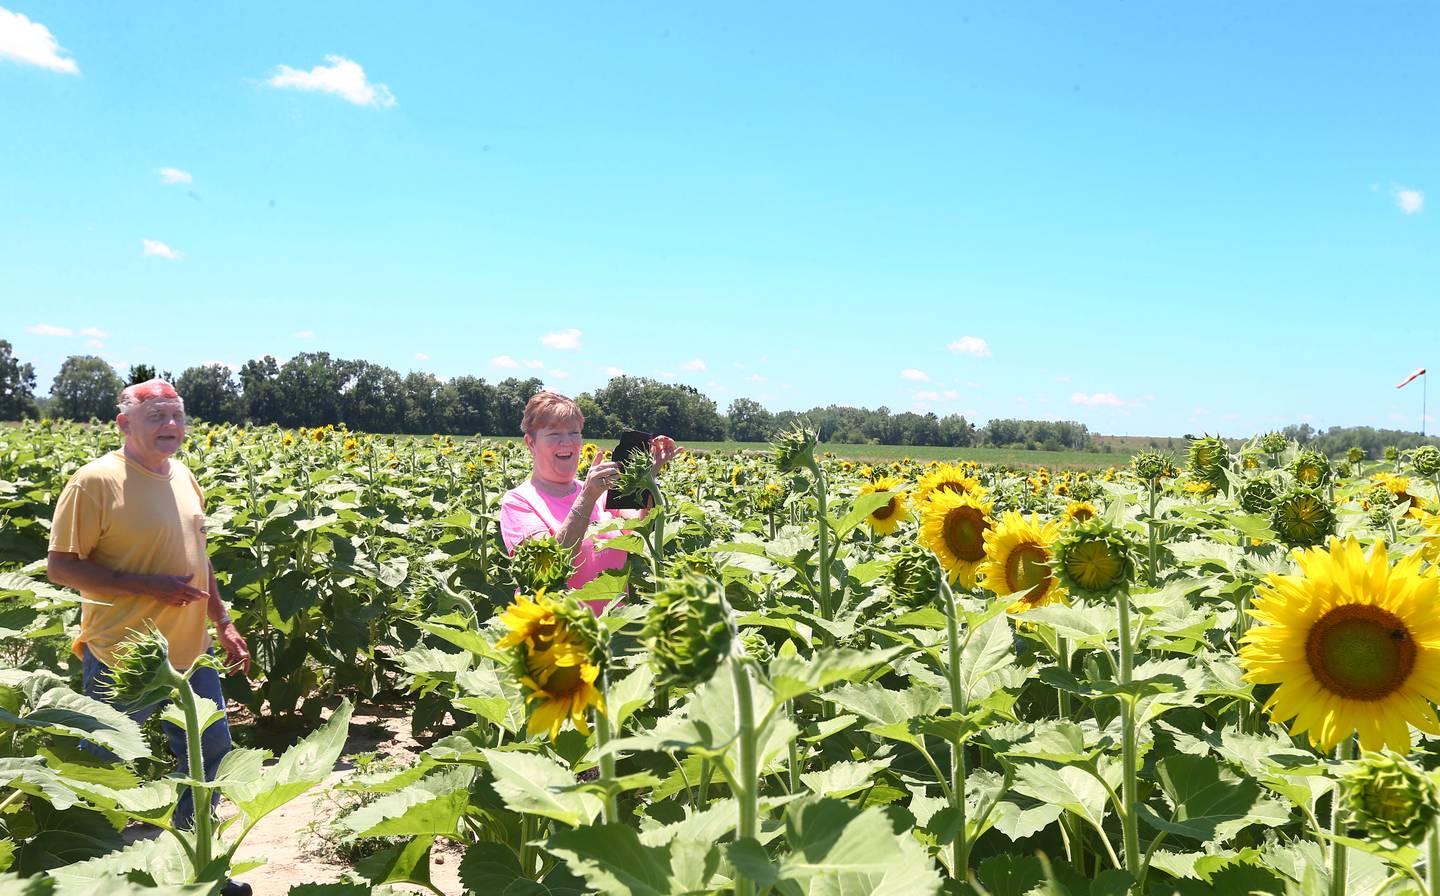 Larry and Robin McCasland of Utica, take photos of the sunflowers on Tuesday July 12, 2022 at Matthiessen State Park in Oglesby.